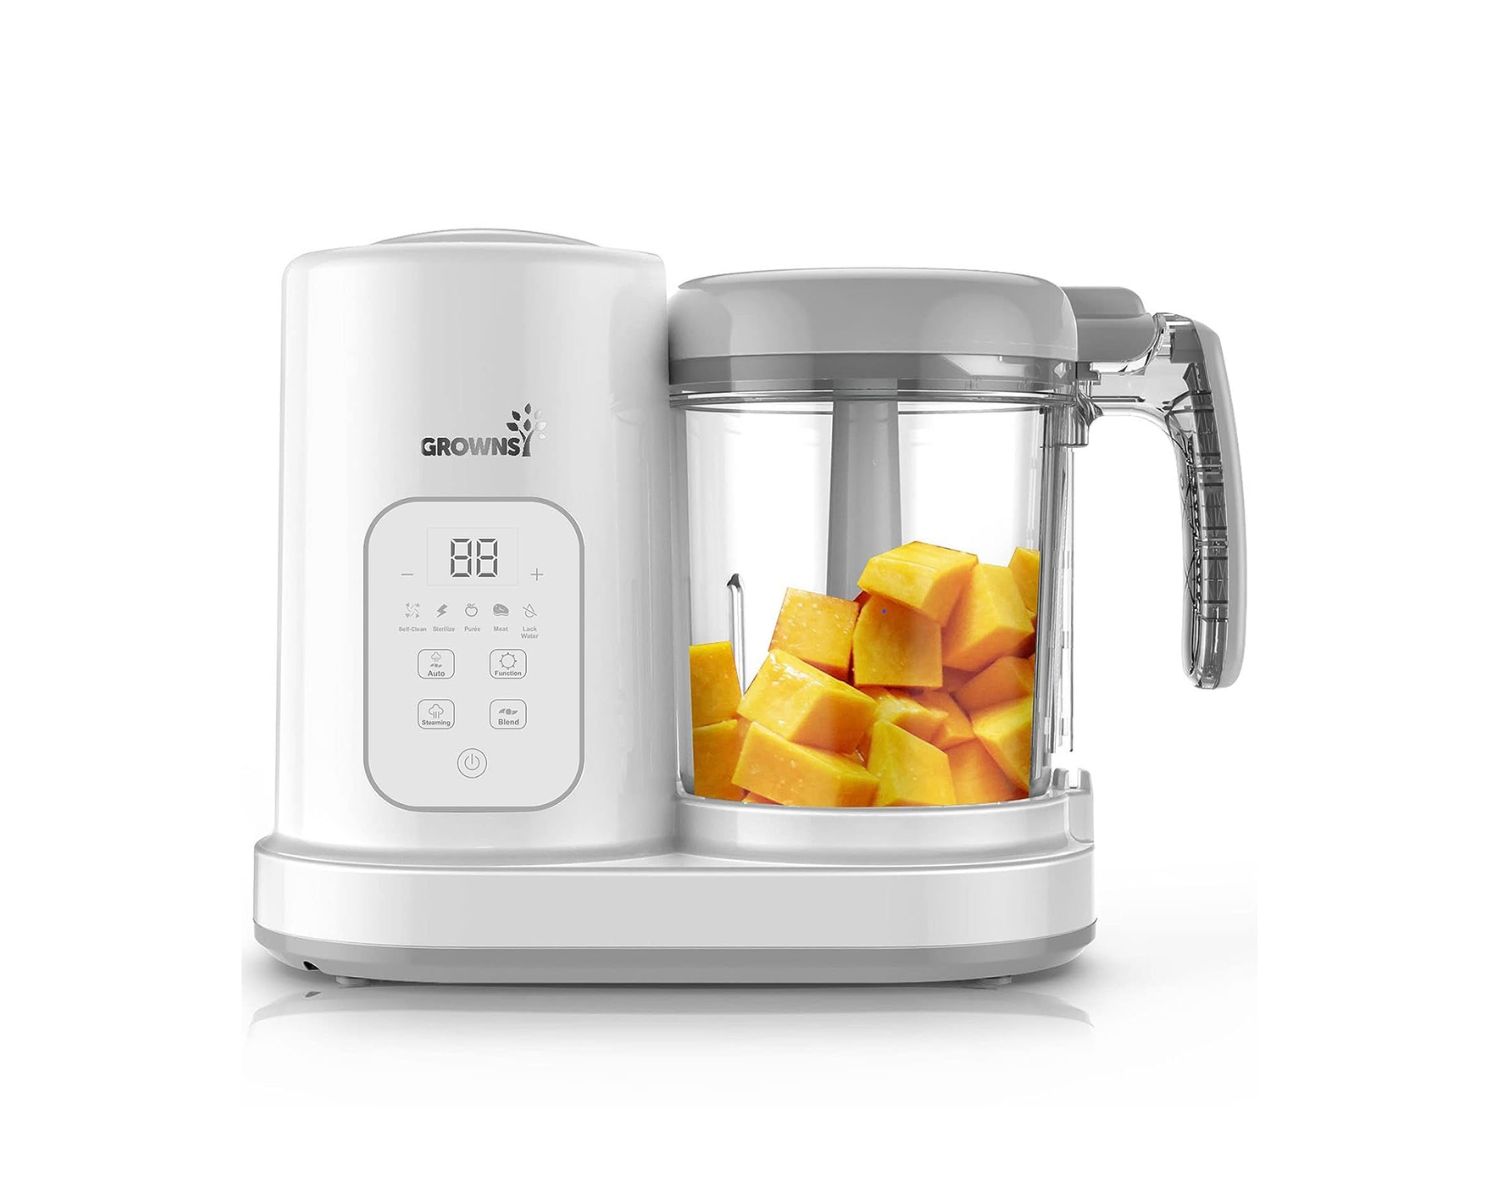 Review: Baby Food Steamer and Blender – A Must-Have Appliance